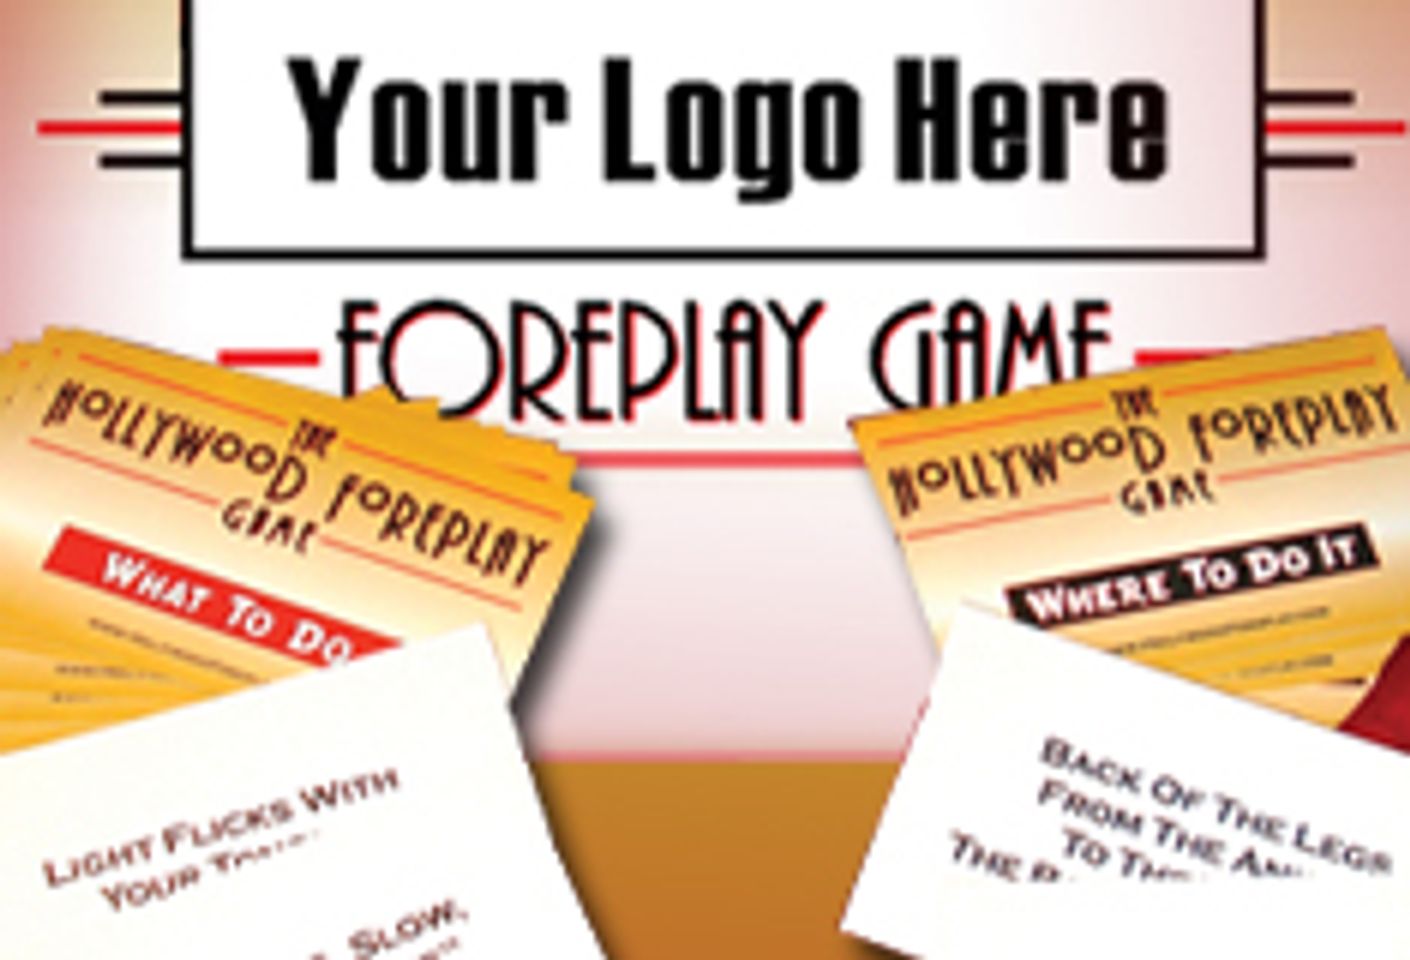 'Hollywood Foreplay' Available as Private-Label Game